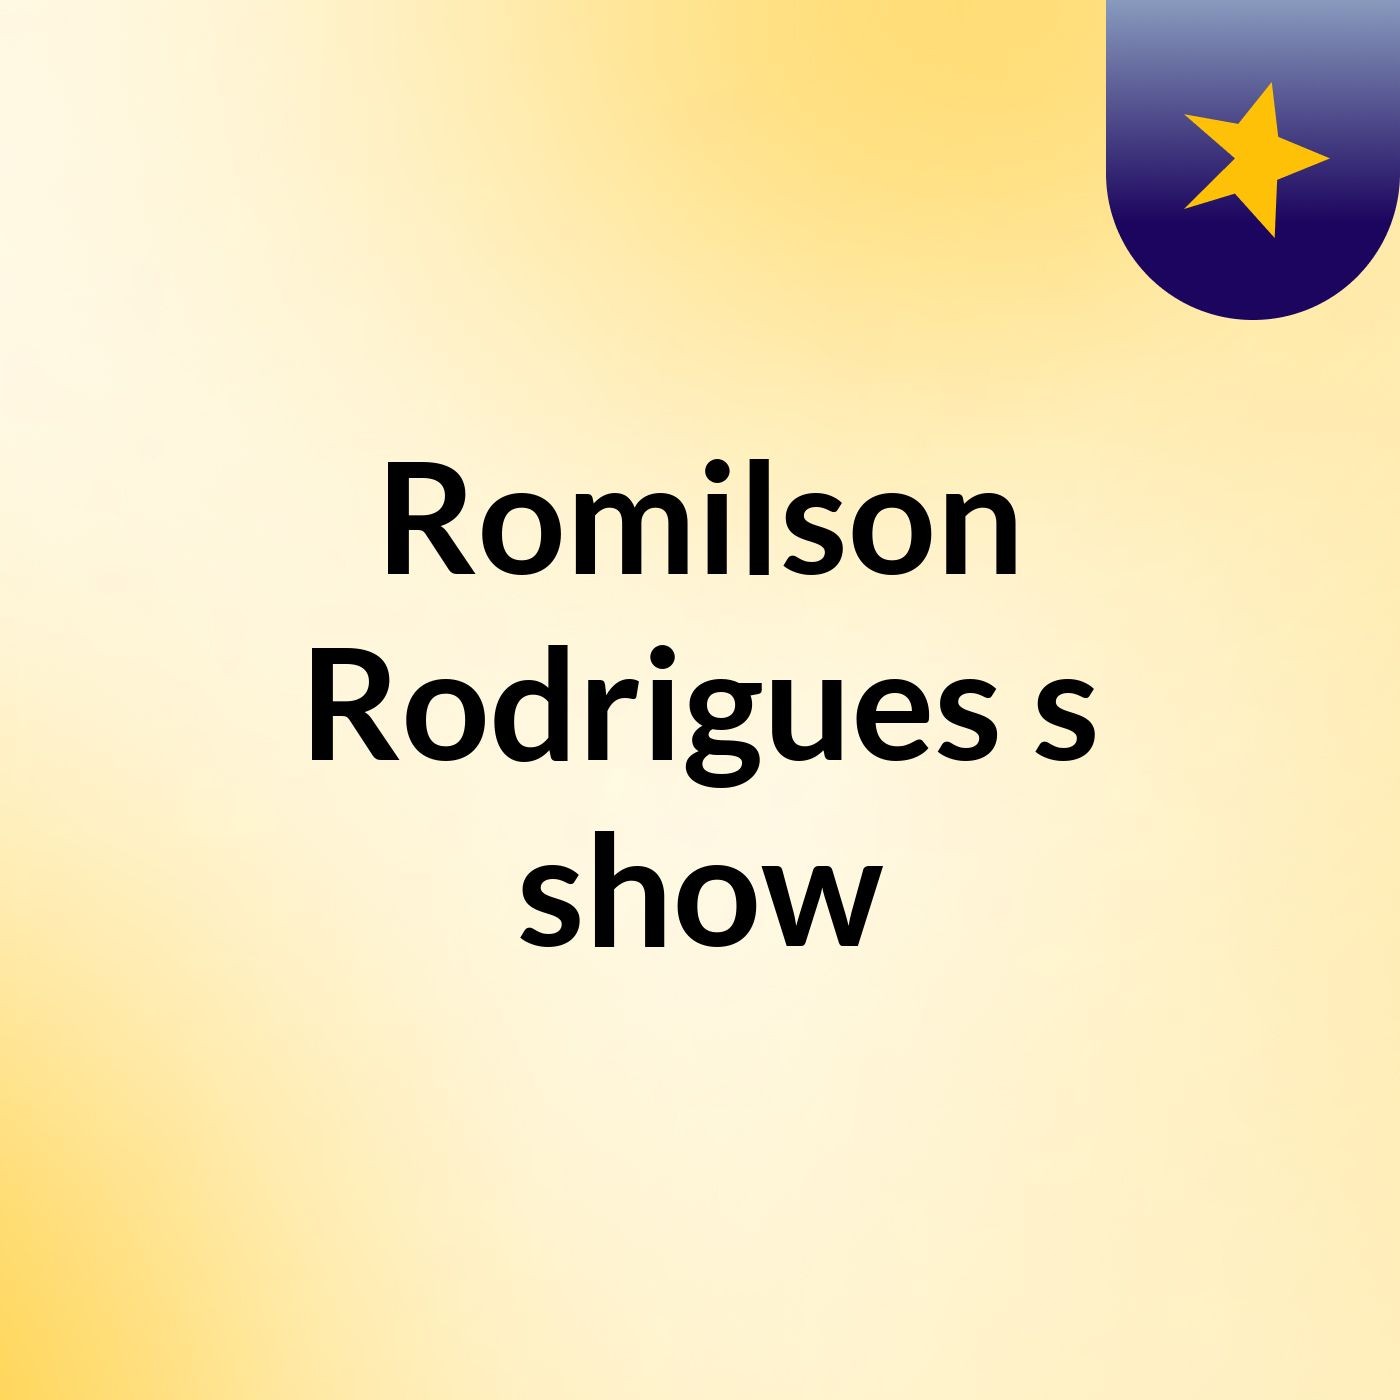 Romilson Rodrigues's show